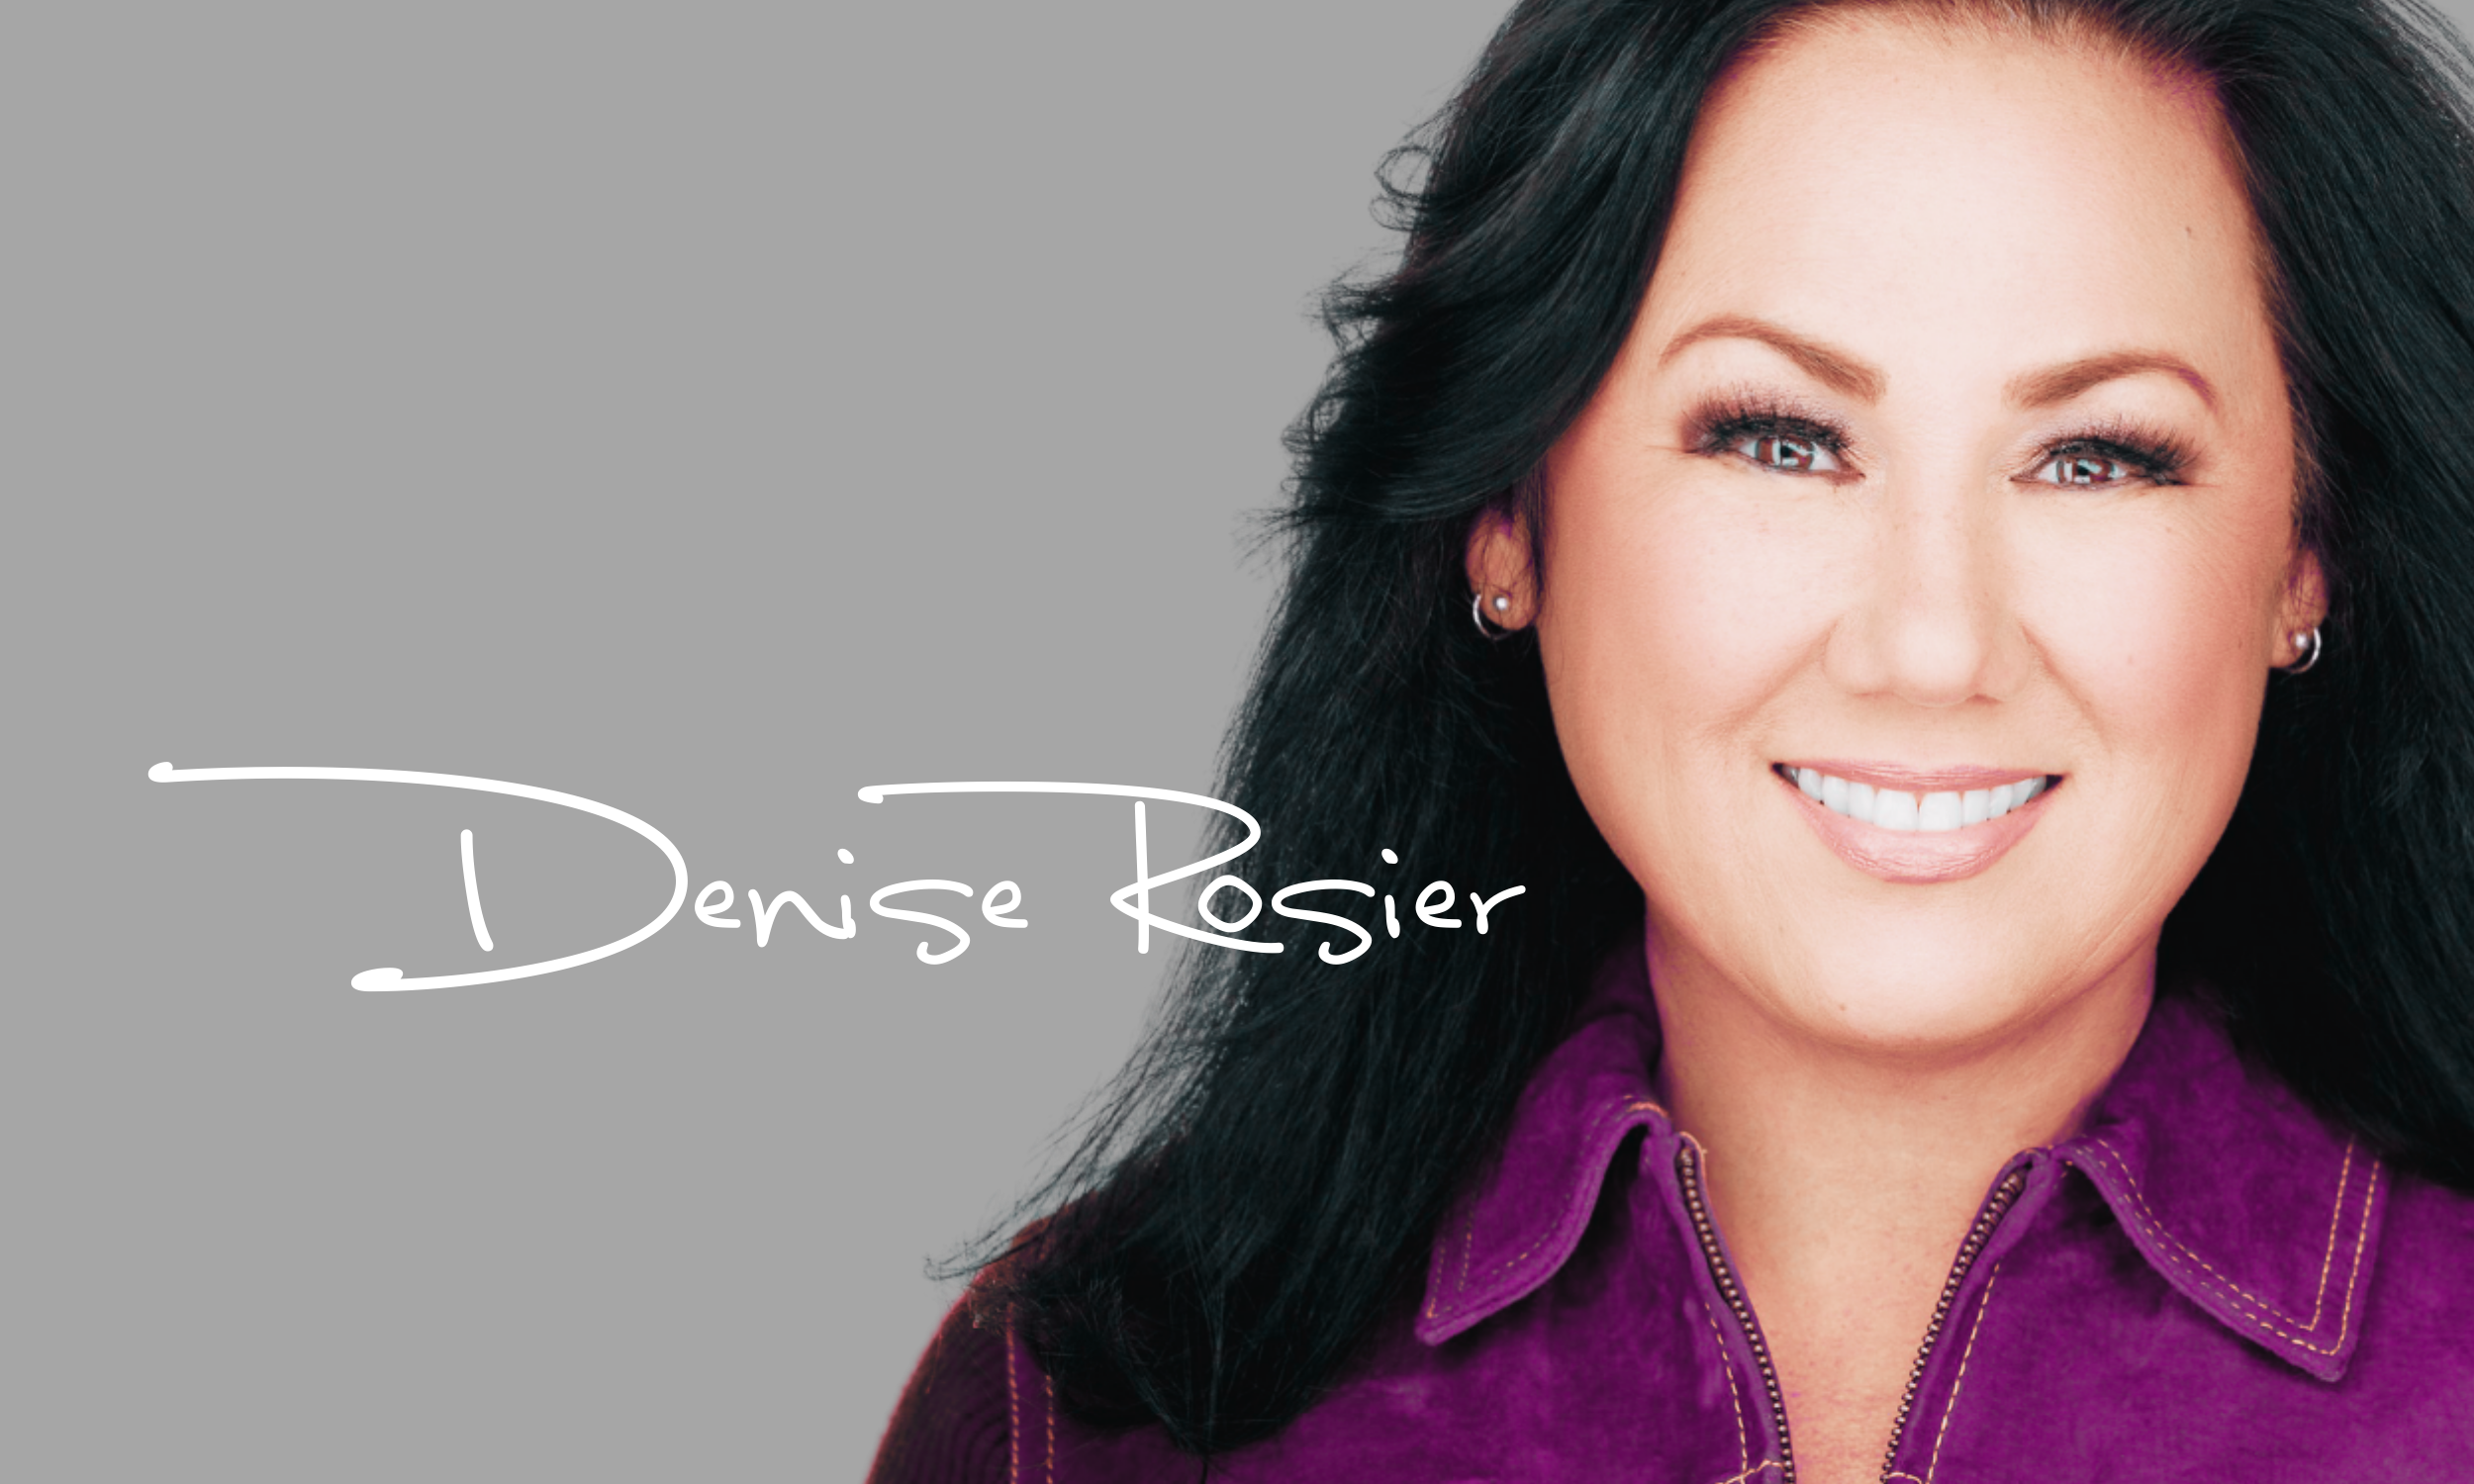 Image of denise rosier with her signature across the image.